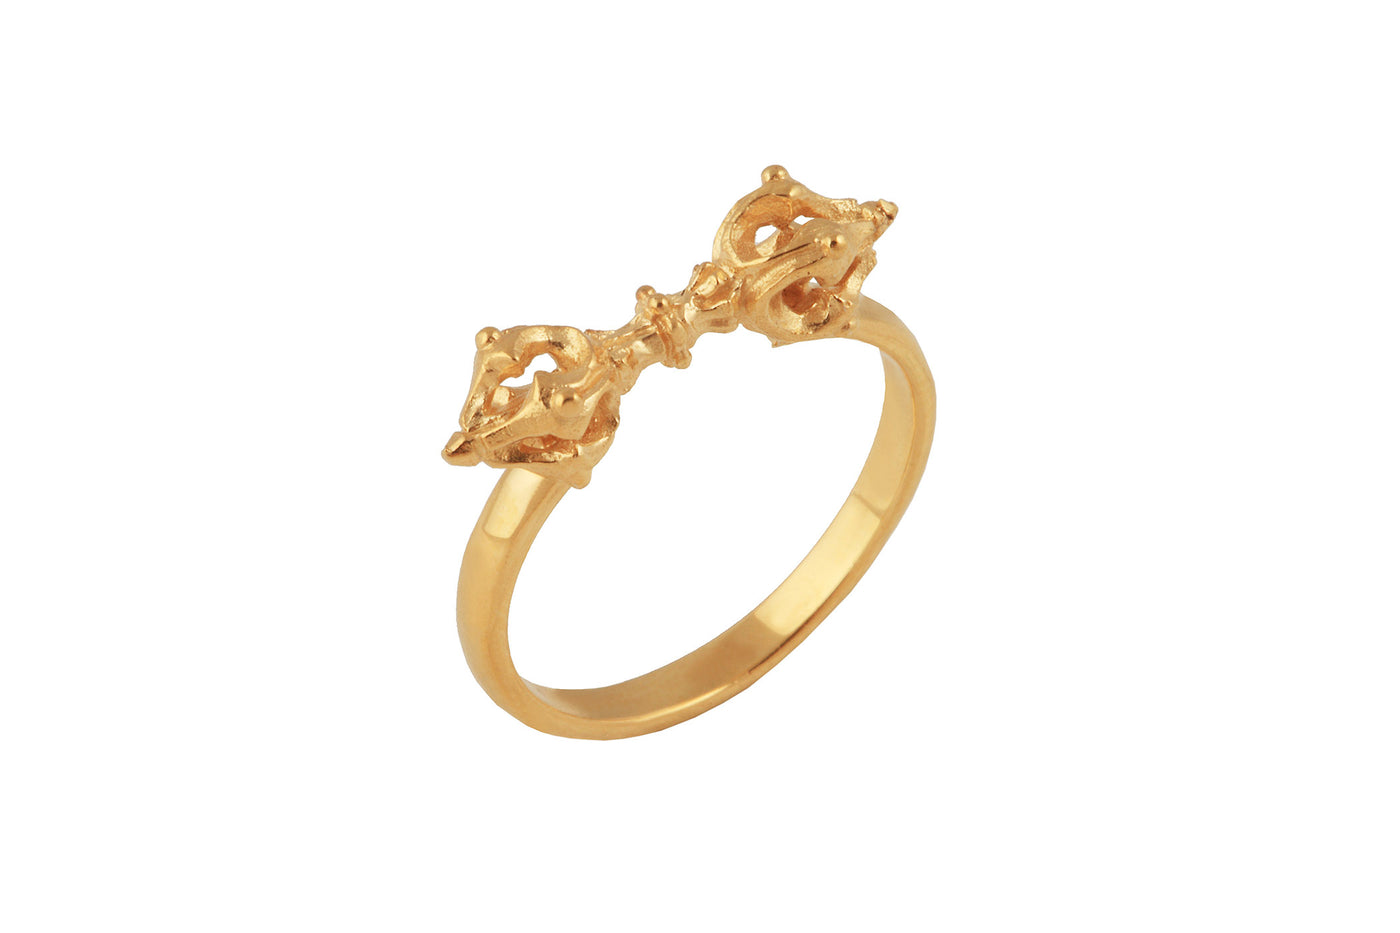 Vajra ring. Gold plated